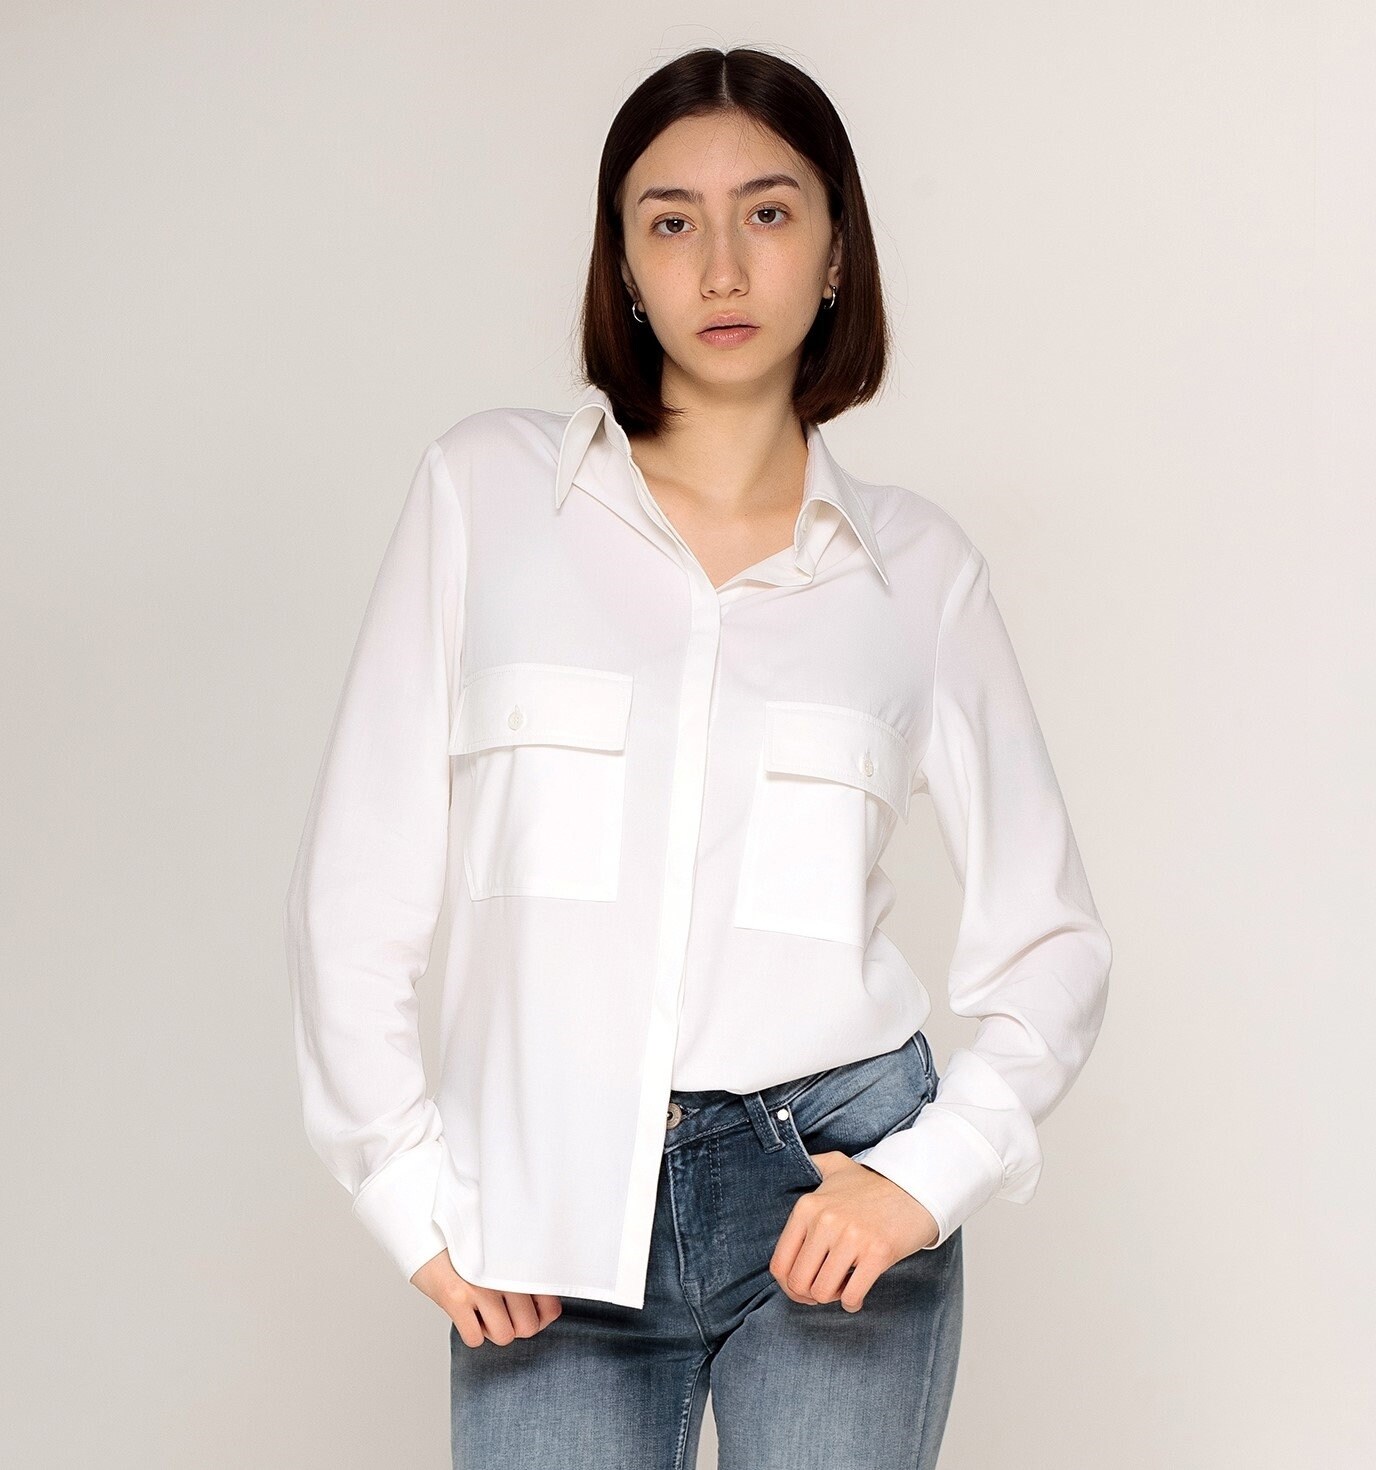 buy stores WHITE White BLOUSE WOMEN, Collar Cotton Blouse, Upgrade Gail  Rich Blouse Your Style with Our Viscose White Blouse with Convenient Breast  Pockets,Womens Clothing 